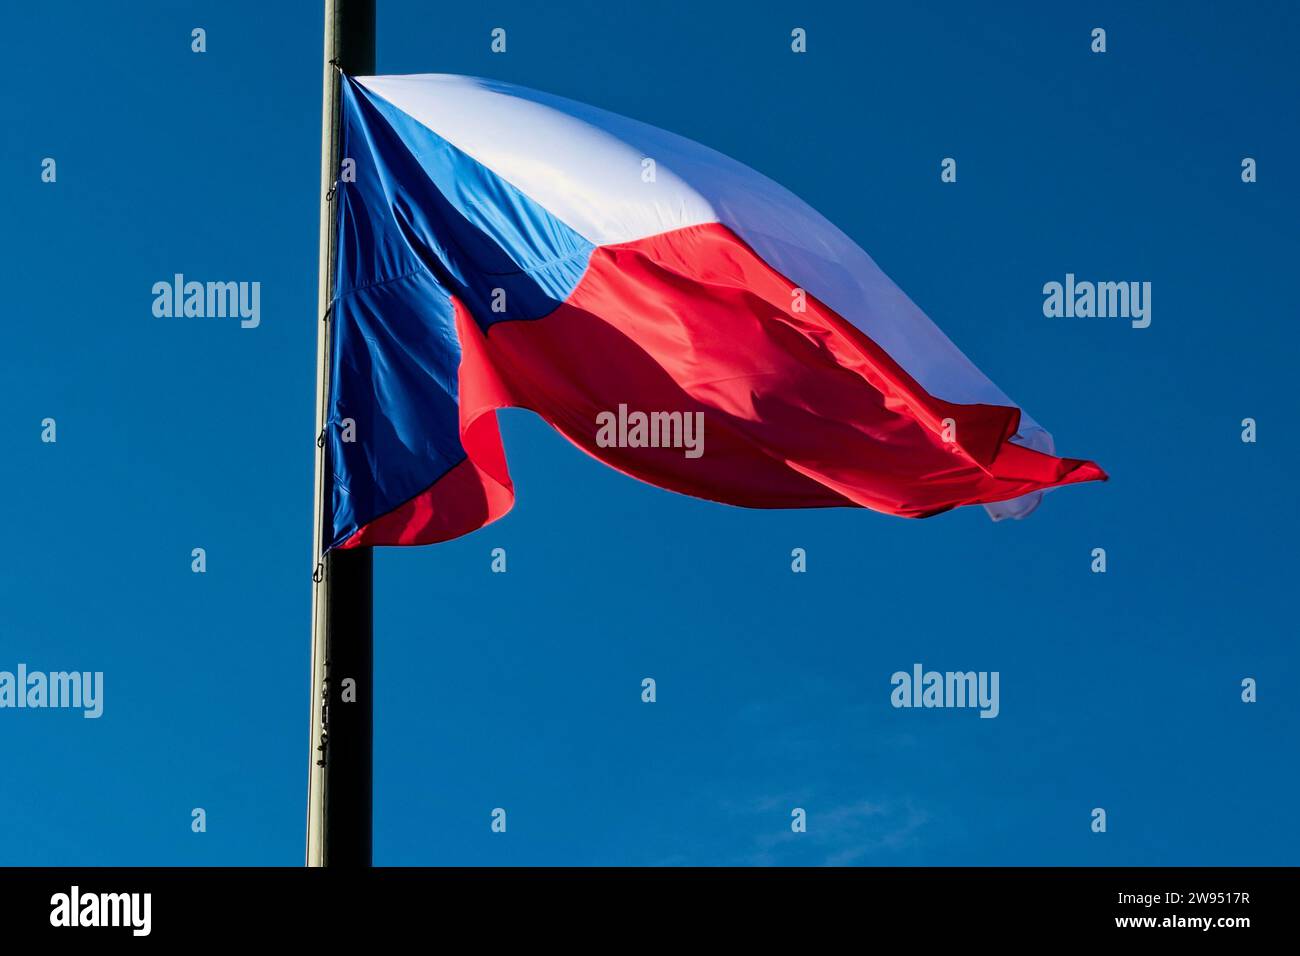 The Czech Republic flag is flying on a flagpole with a blue sky in the background. Stock Photo